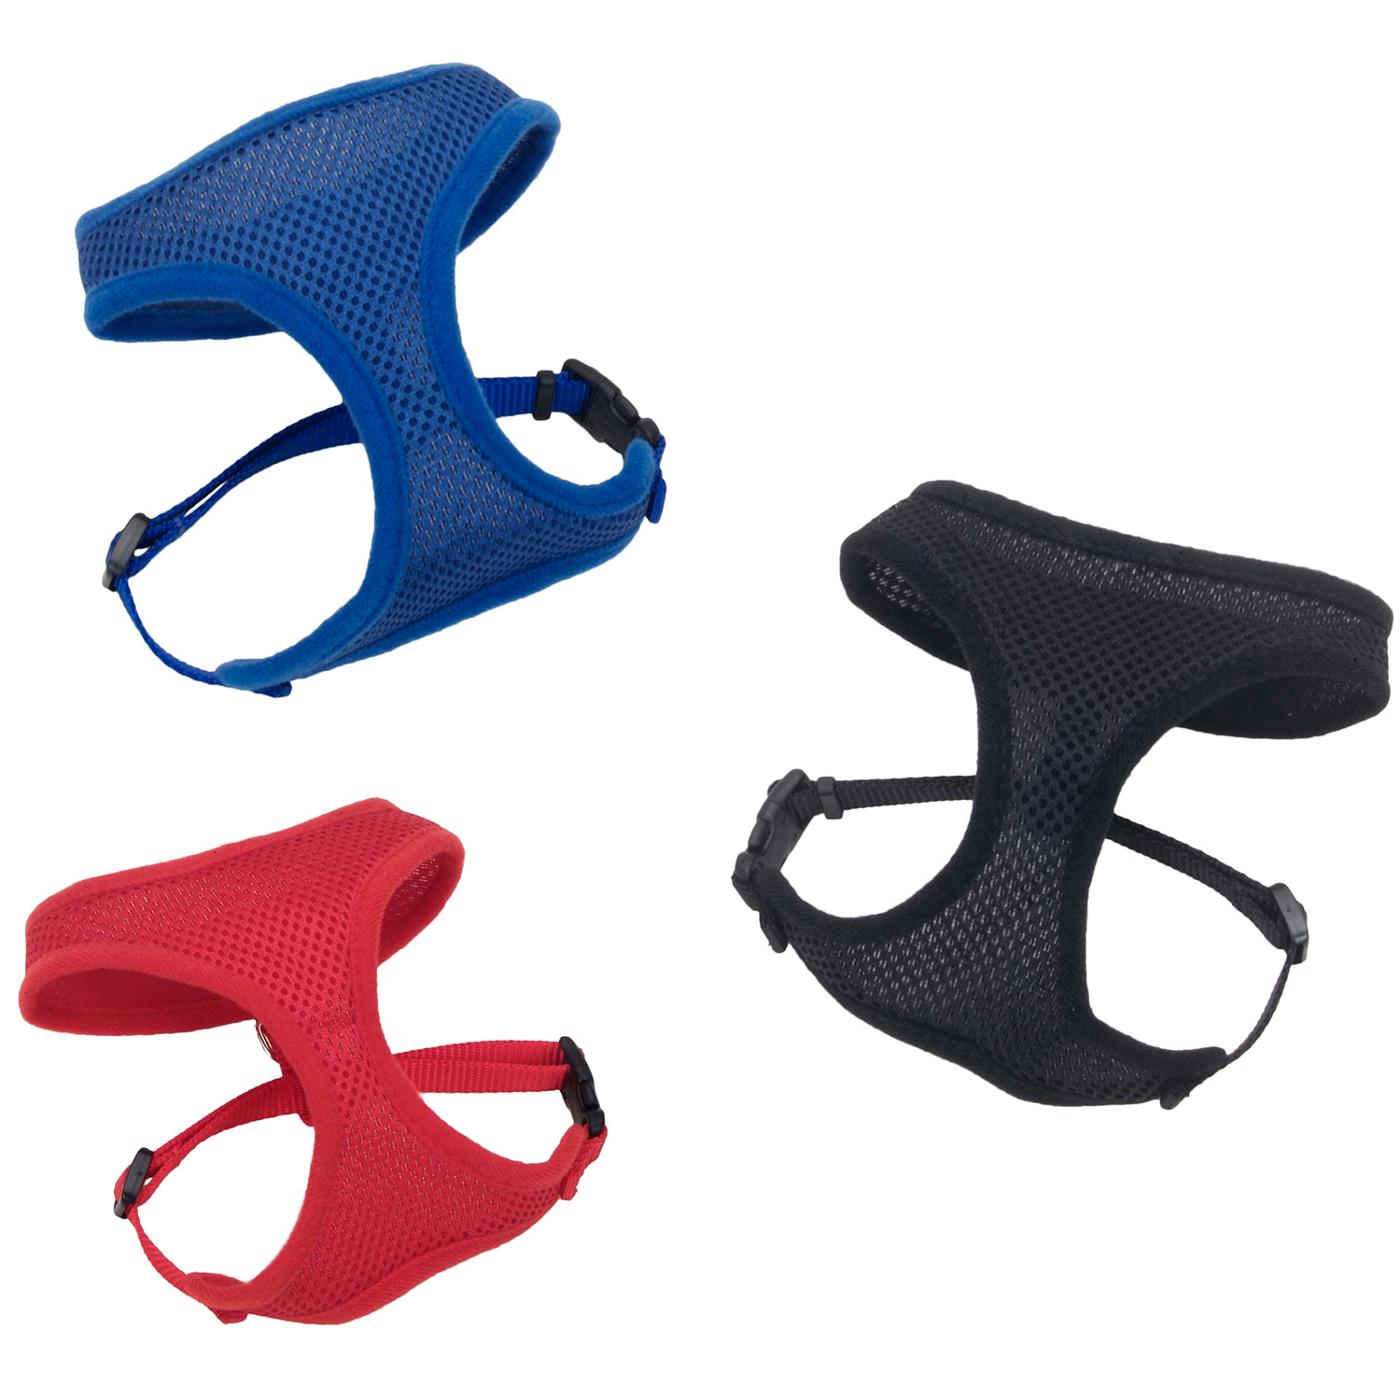 Coastal Pet Products Comfort Soft Extra Small Adjustable Harness, Assorted Colors; image 3 of 4